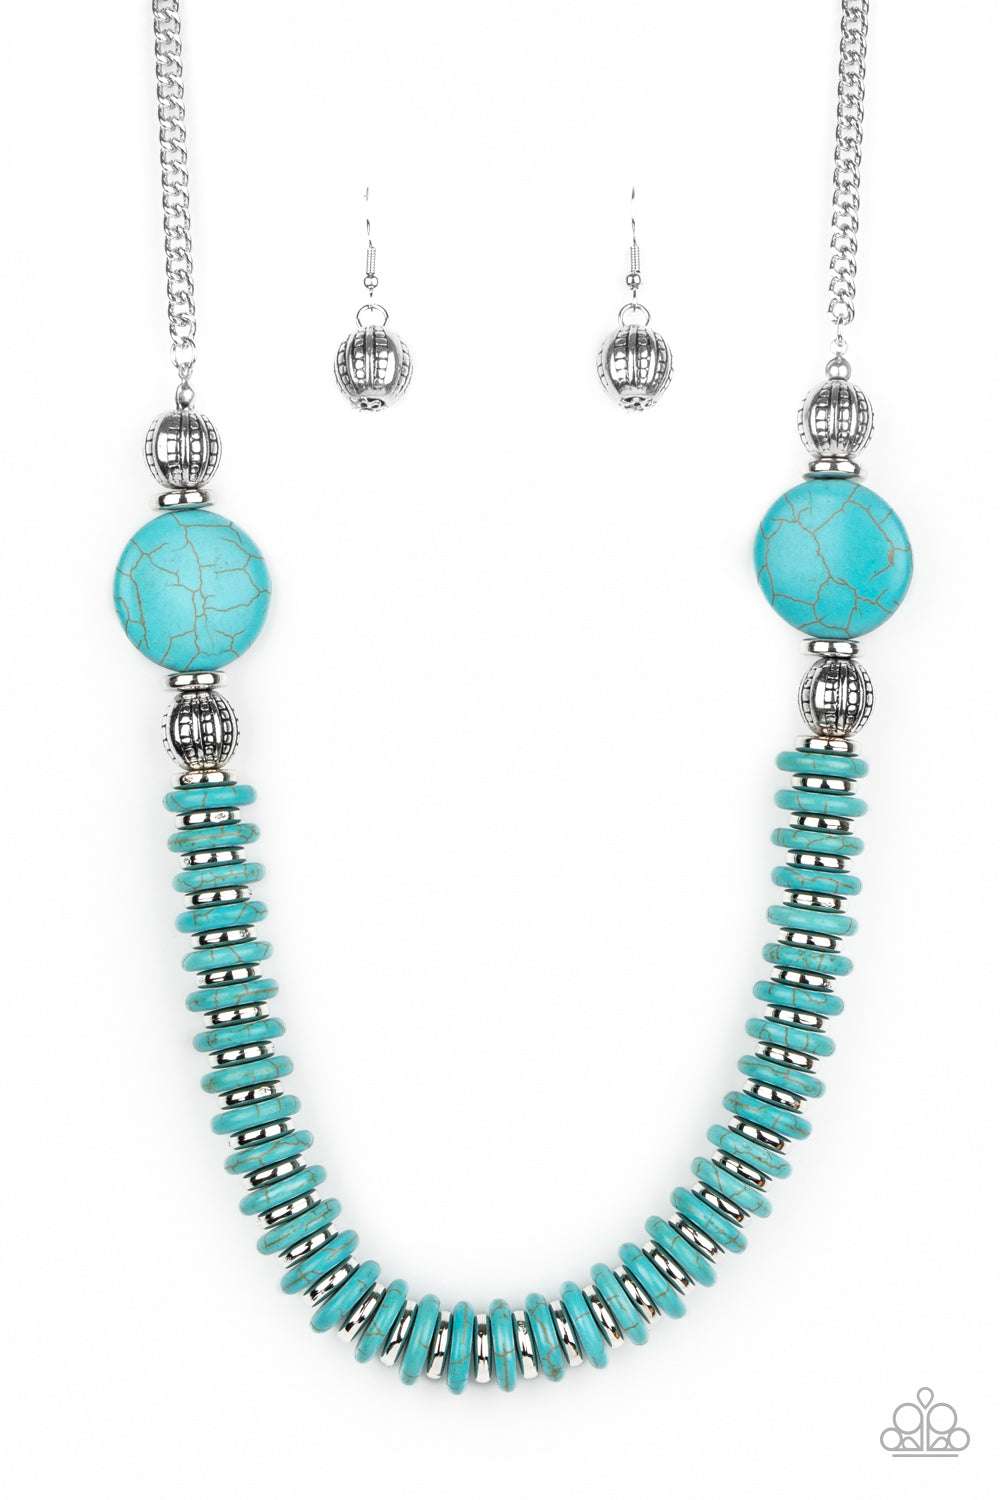 Paparazzi Desert Revival - Blue Necklace - A Finishing Touch Jewelry